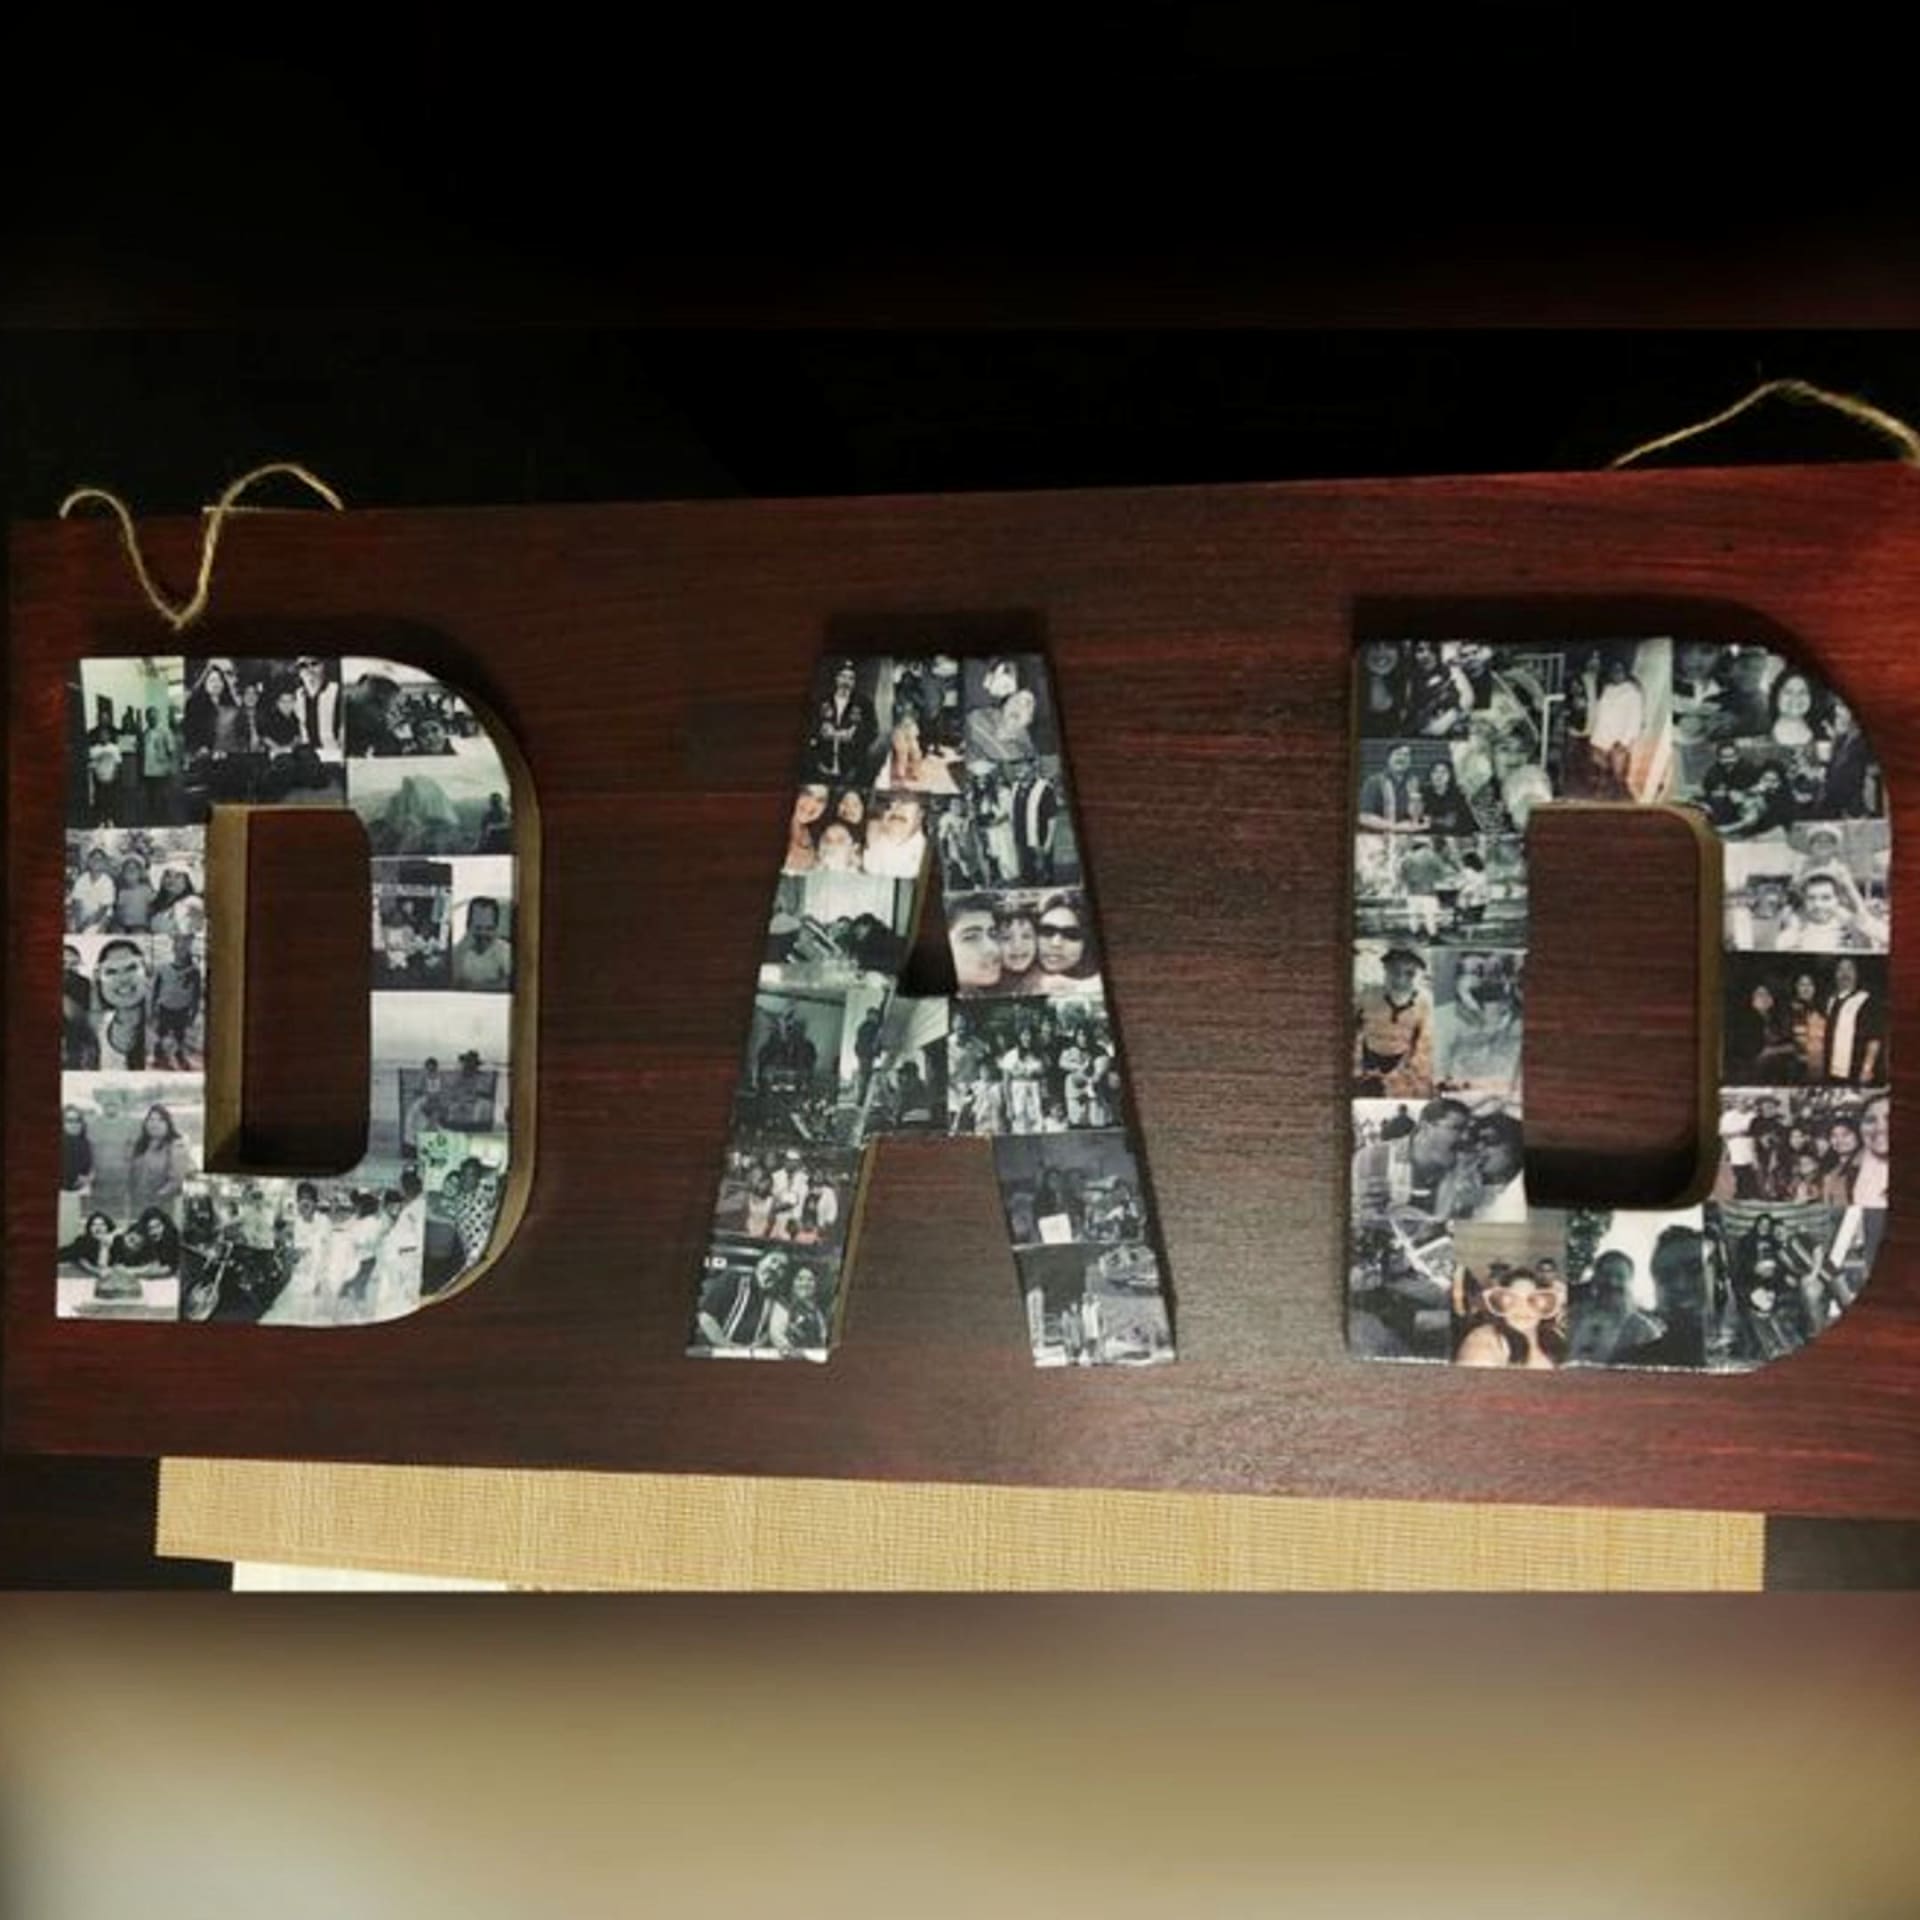 DIY picture collage letters ideas - photo collage letters spelling words - like this Dad picture collage - what a great handmade gift idea for Dad for Fathers' day or his birthday